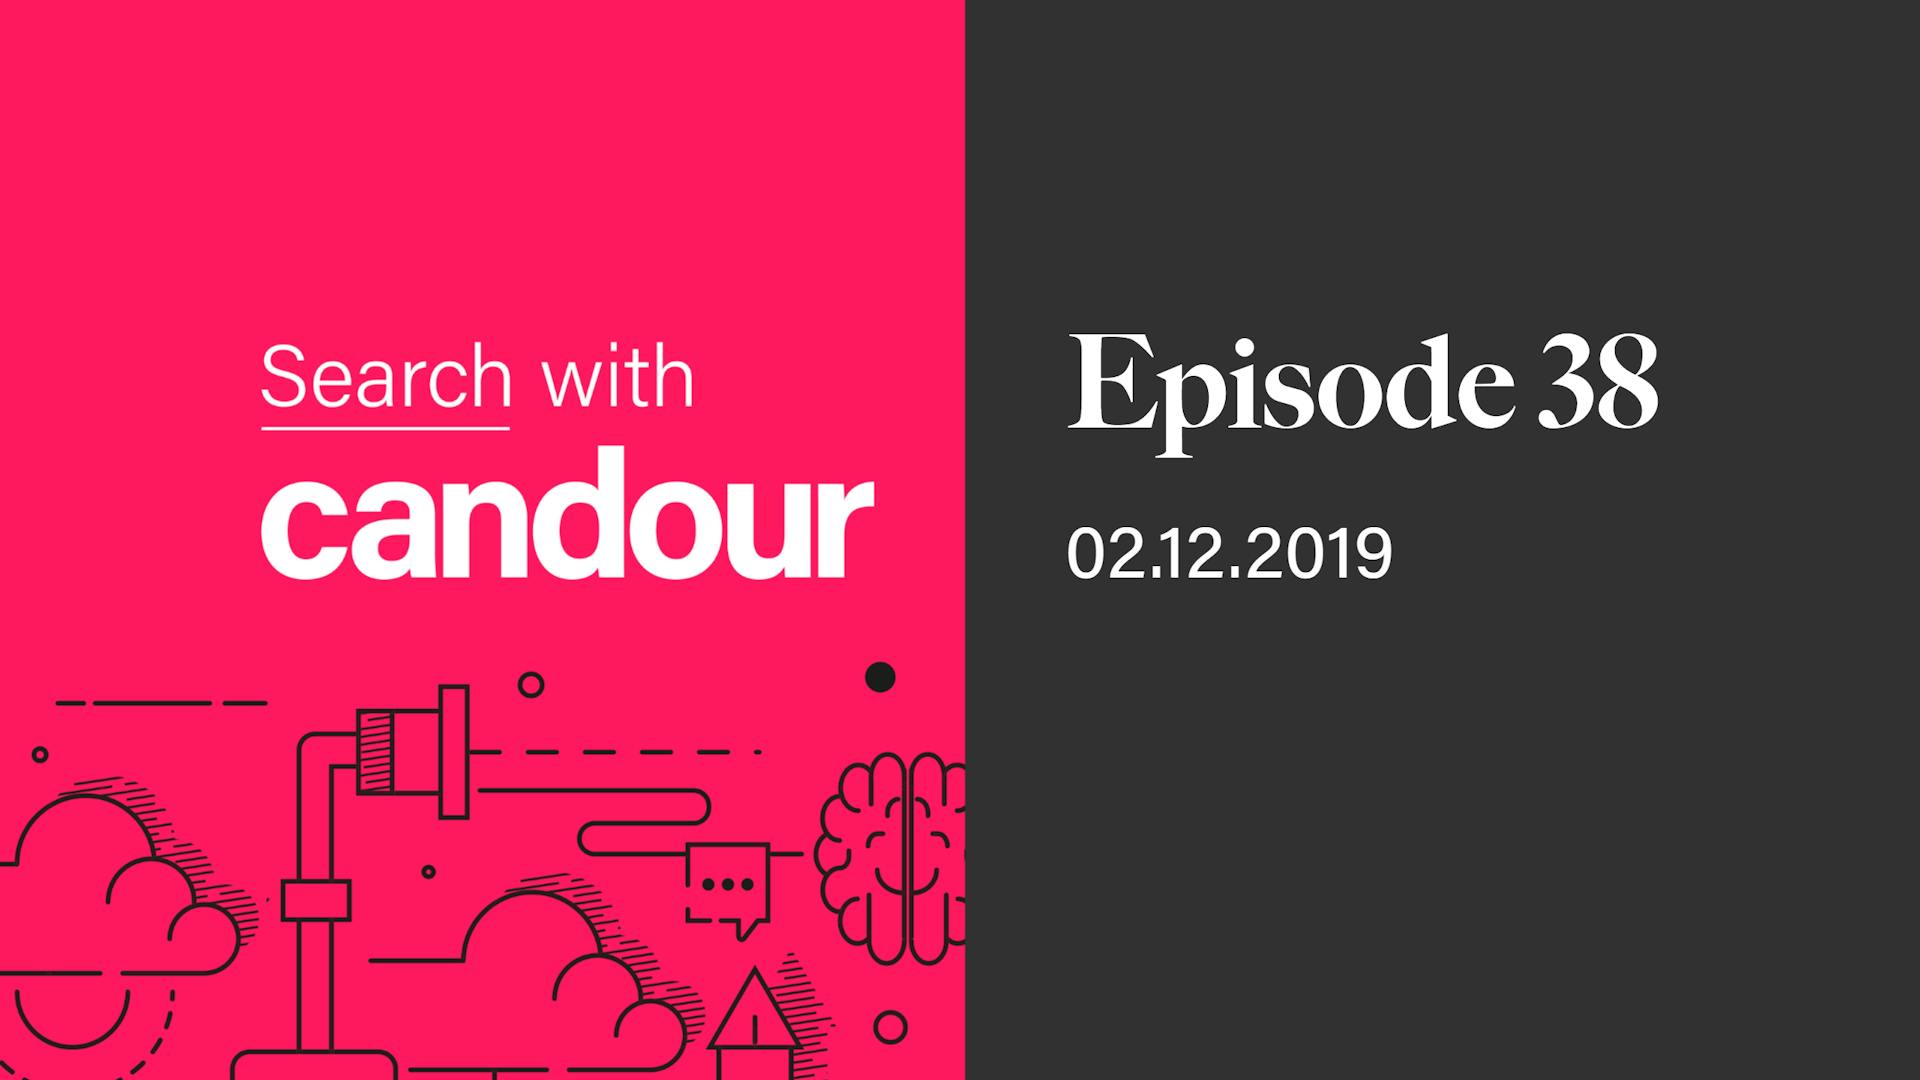 Search with Candour Episode 38